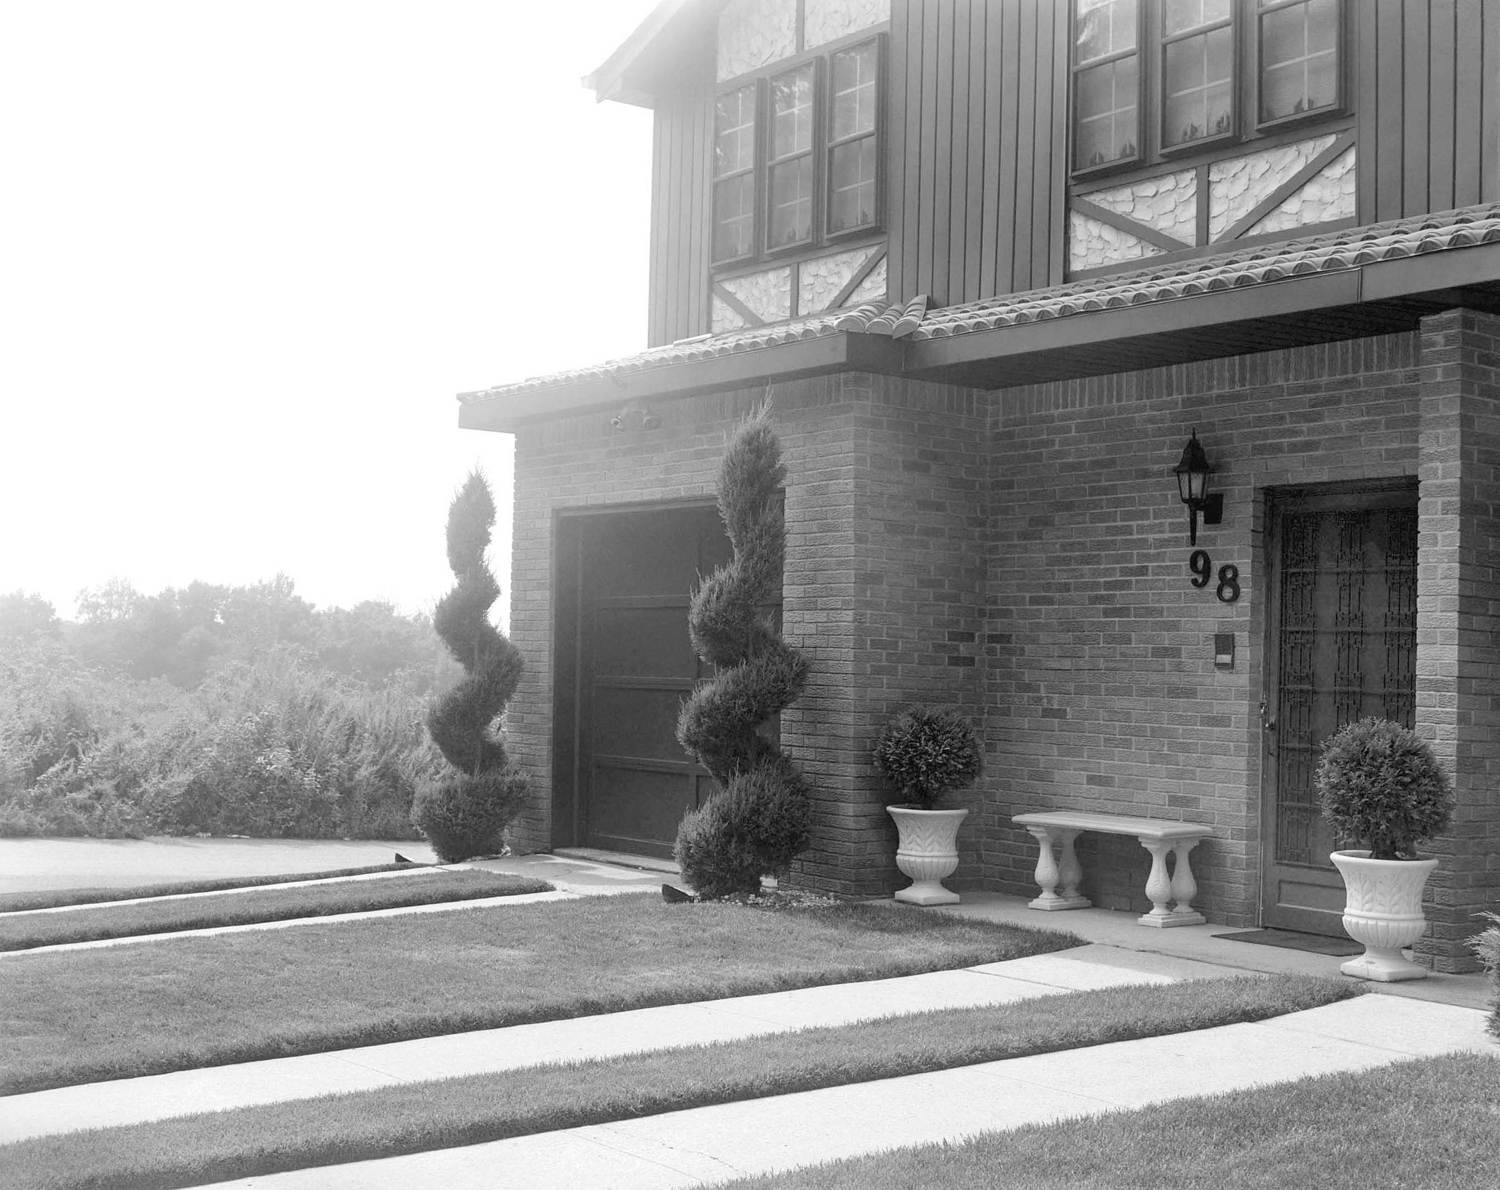 House with spiral bushes bordering the entrance to the garage.